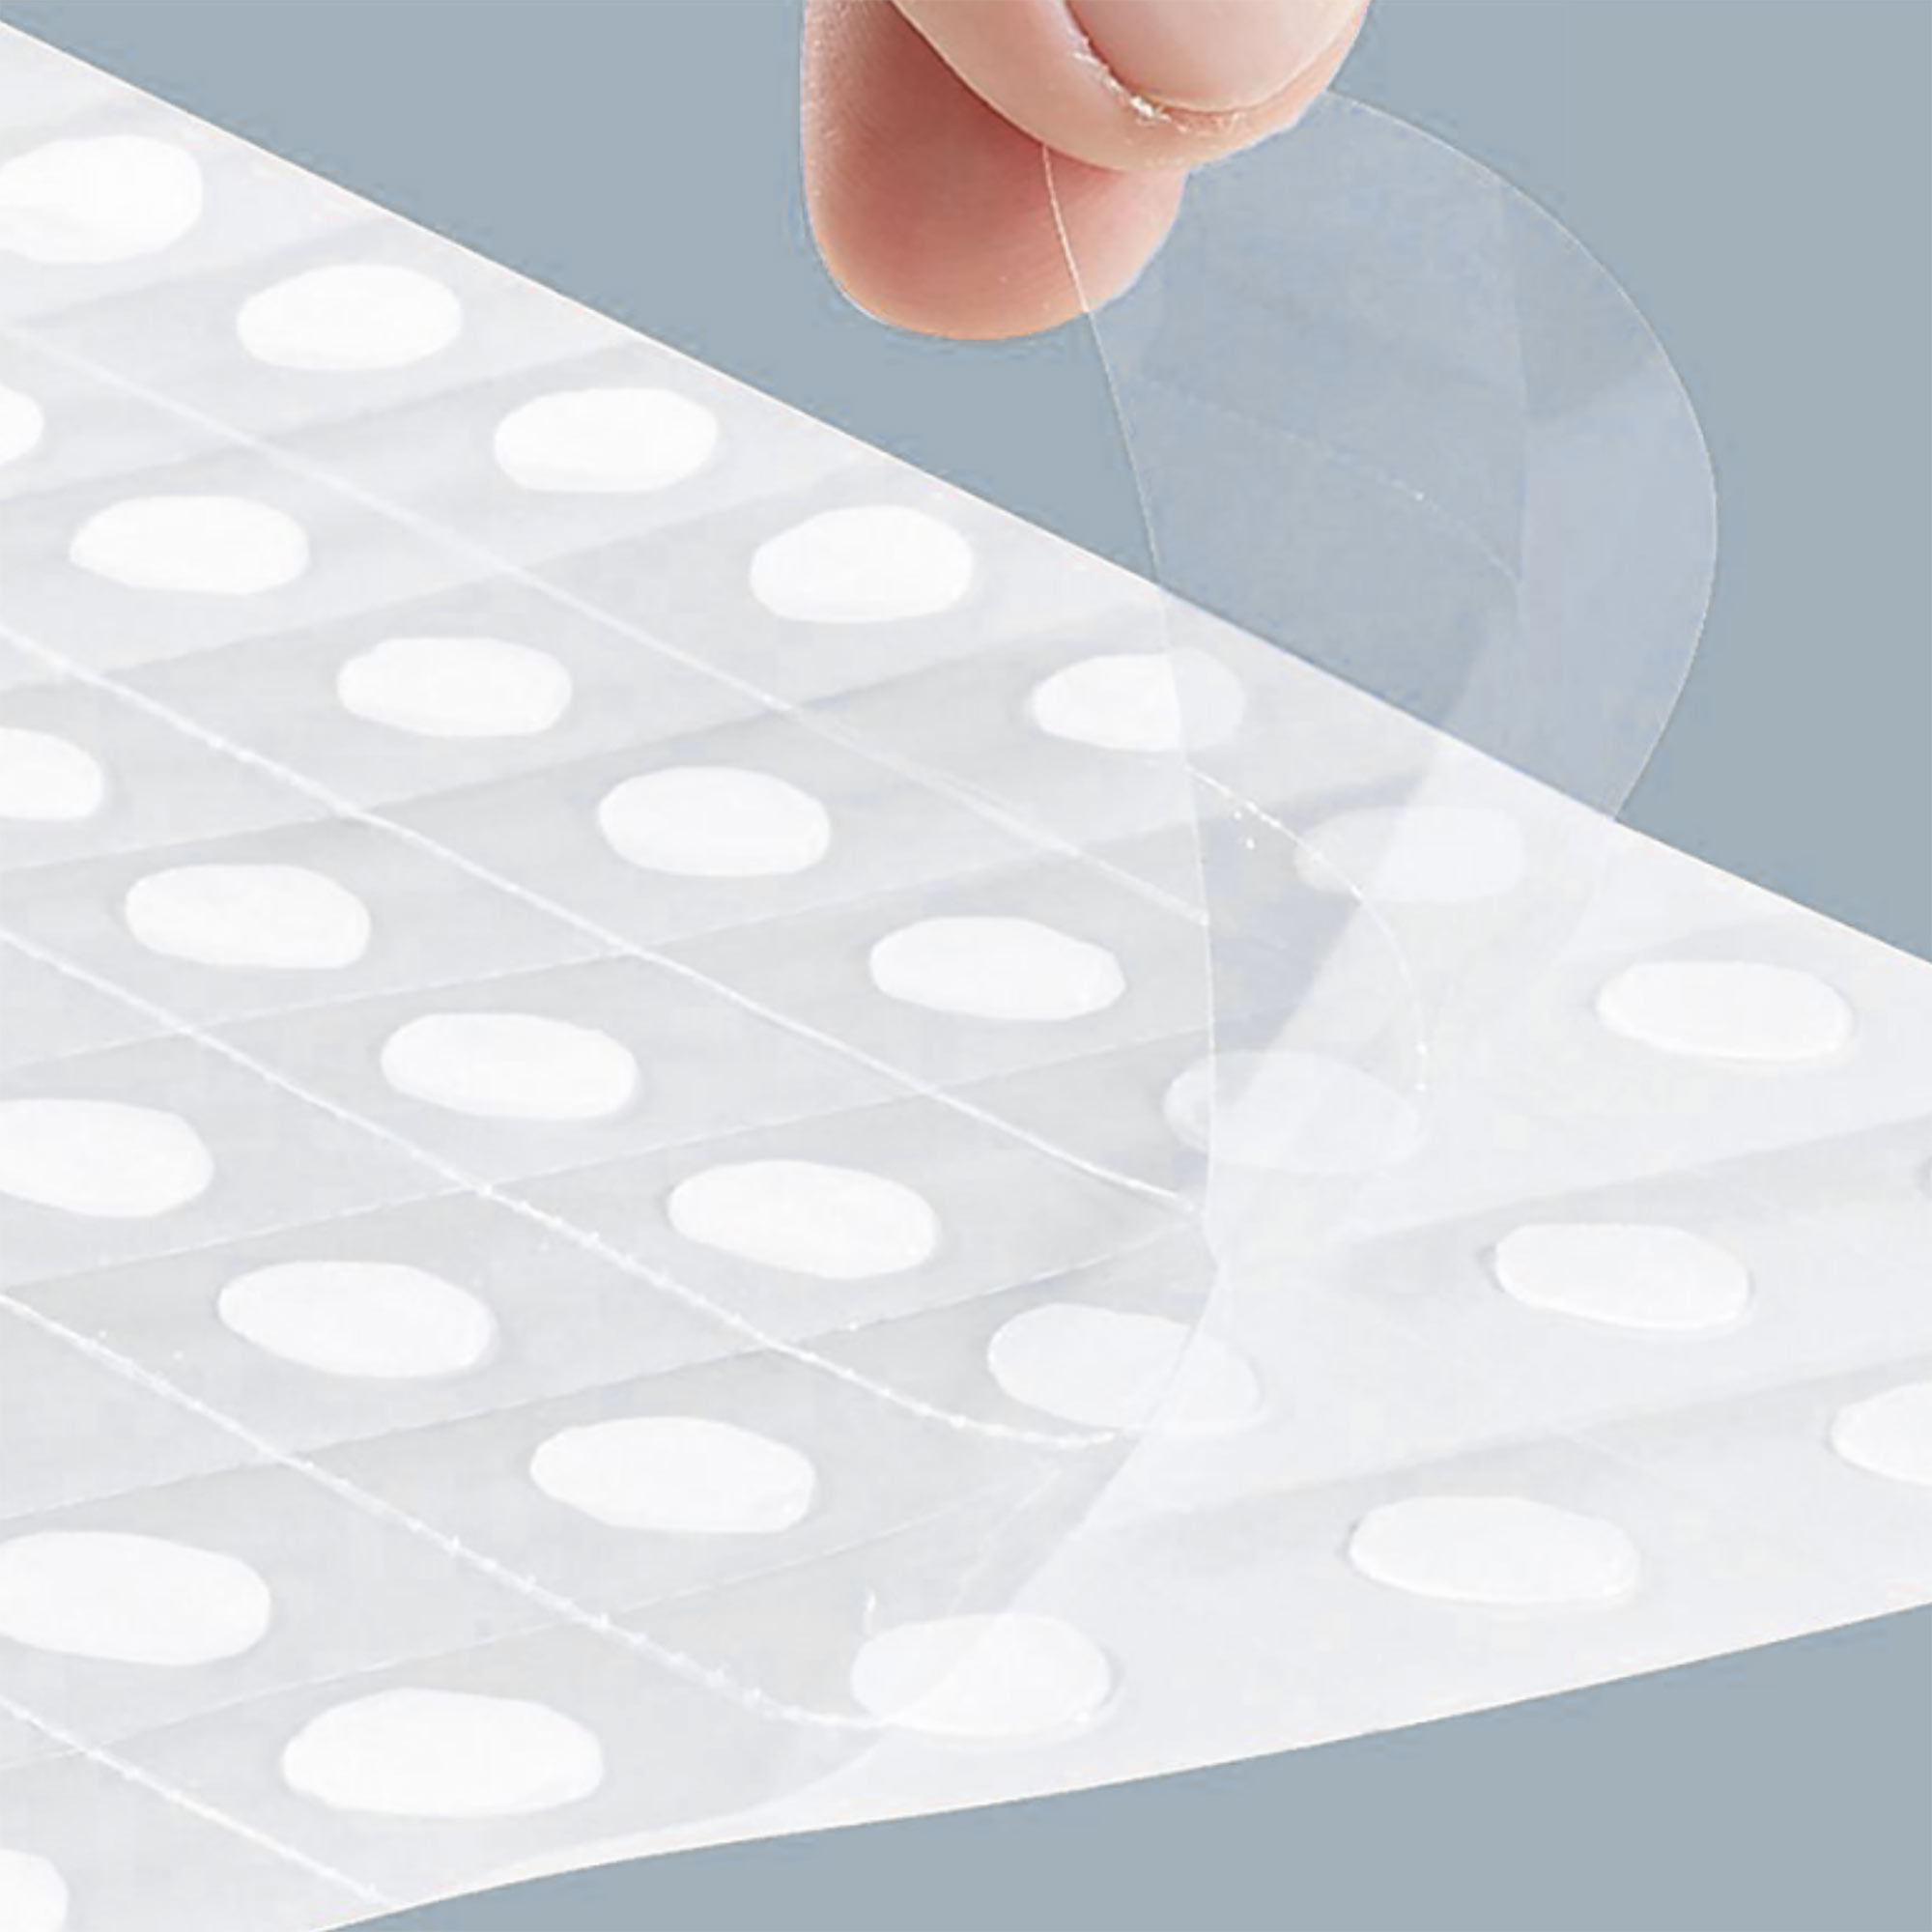 Double Sided Adhesive Dots - 10 pcs